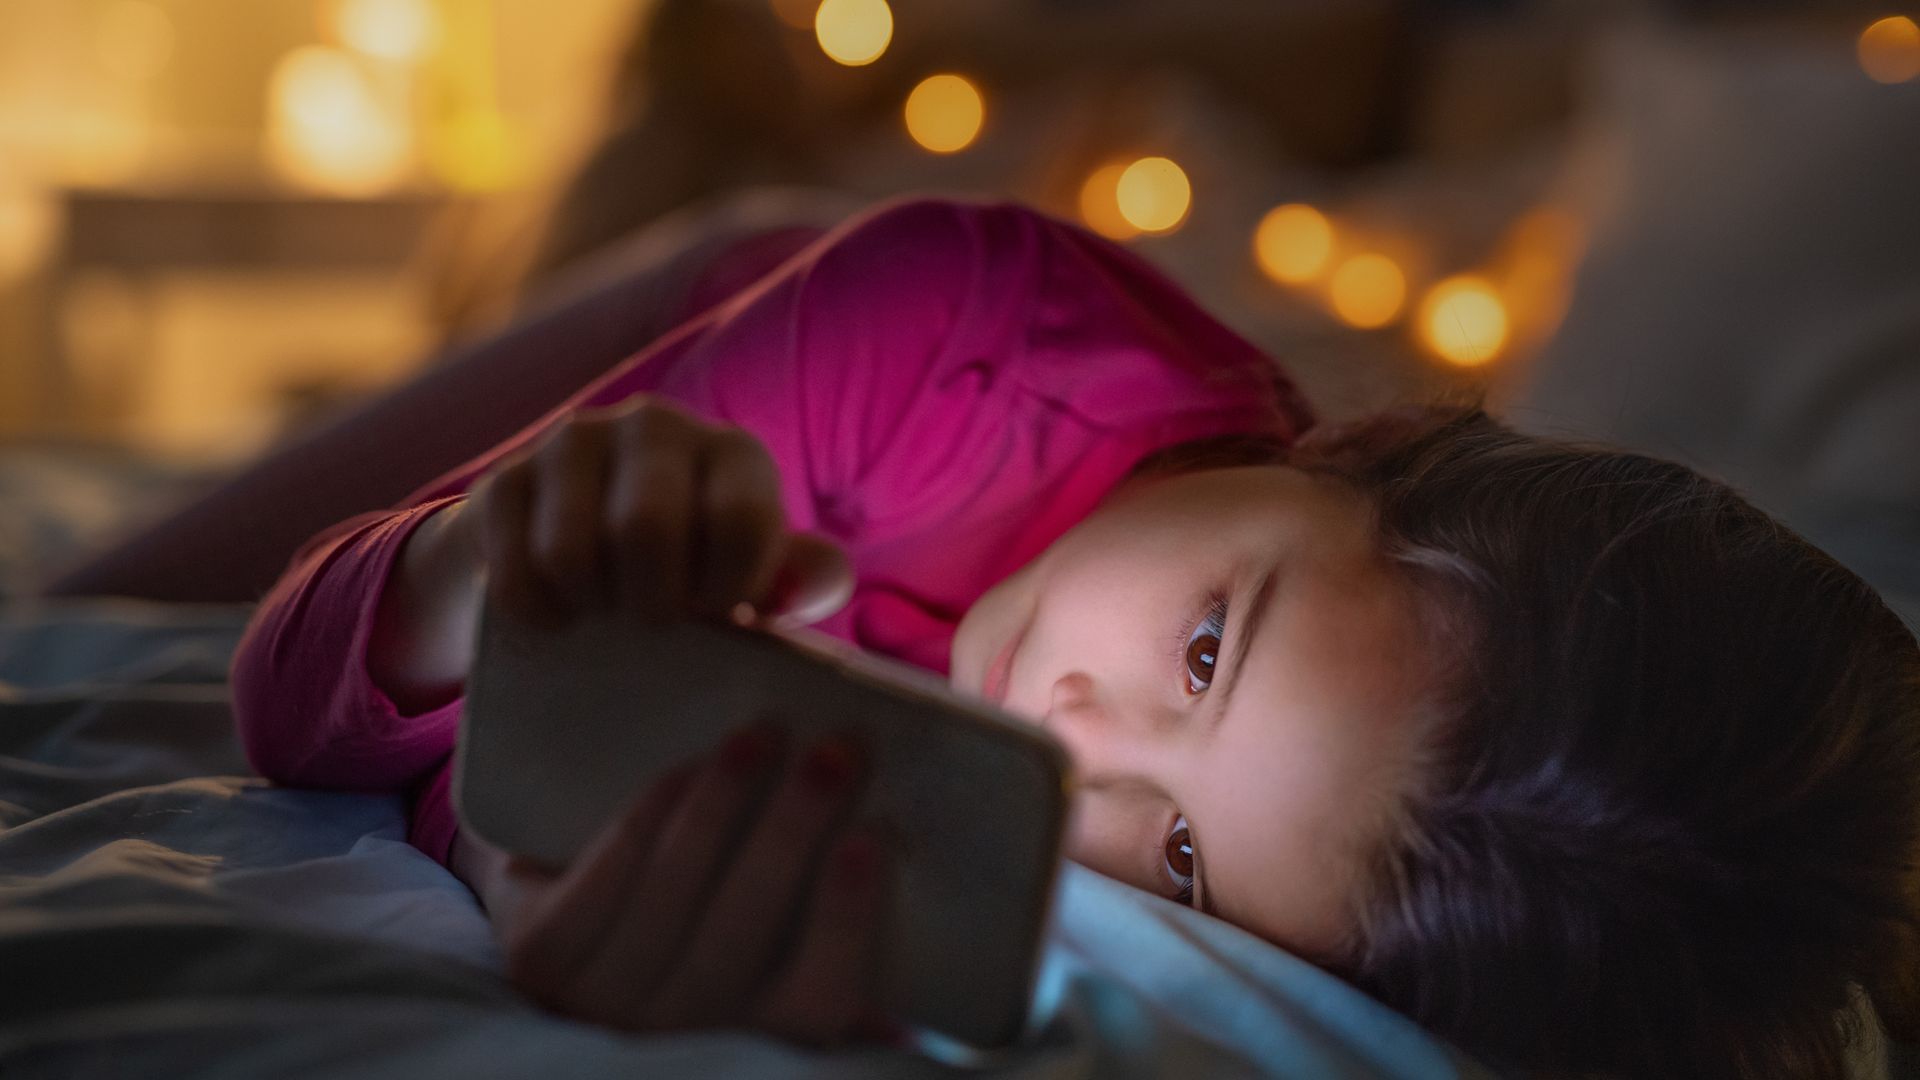 Small girl indoors on bed at night, using telephone.